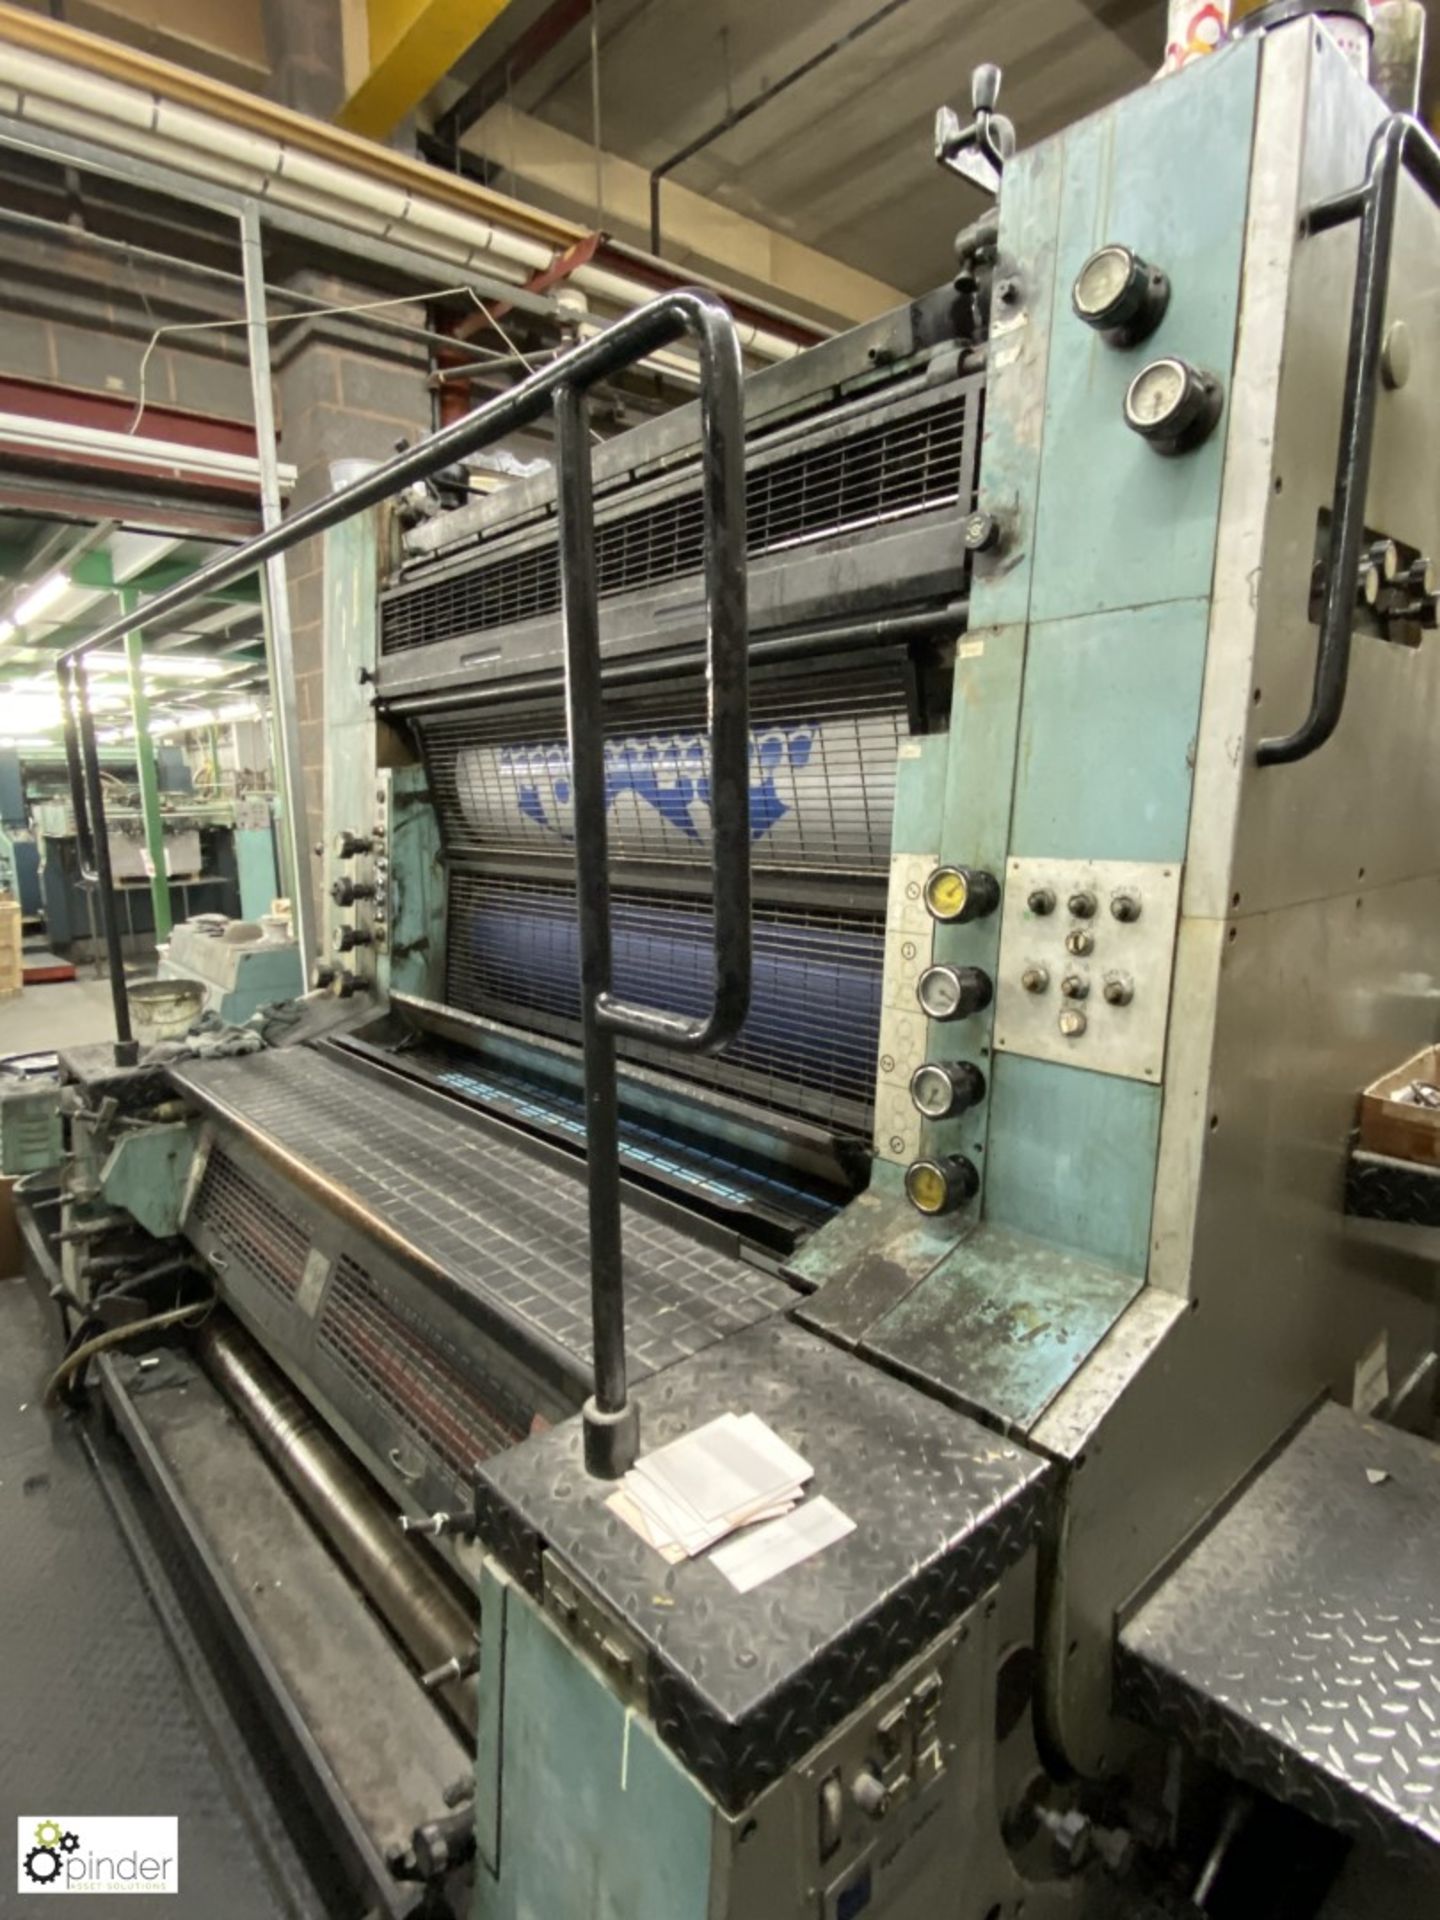 Man Roland 802 7 Series 826 2-colour Press, year 1981, serial number 11217B, max sheet size 1115mm x - Image 16 of 18